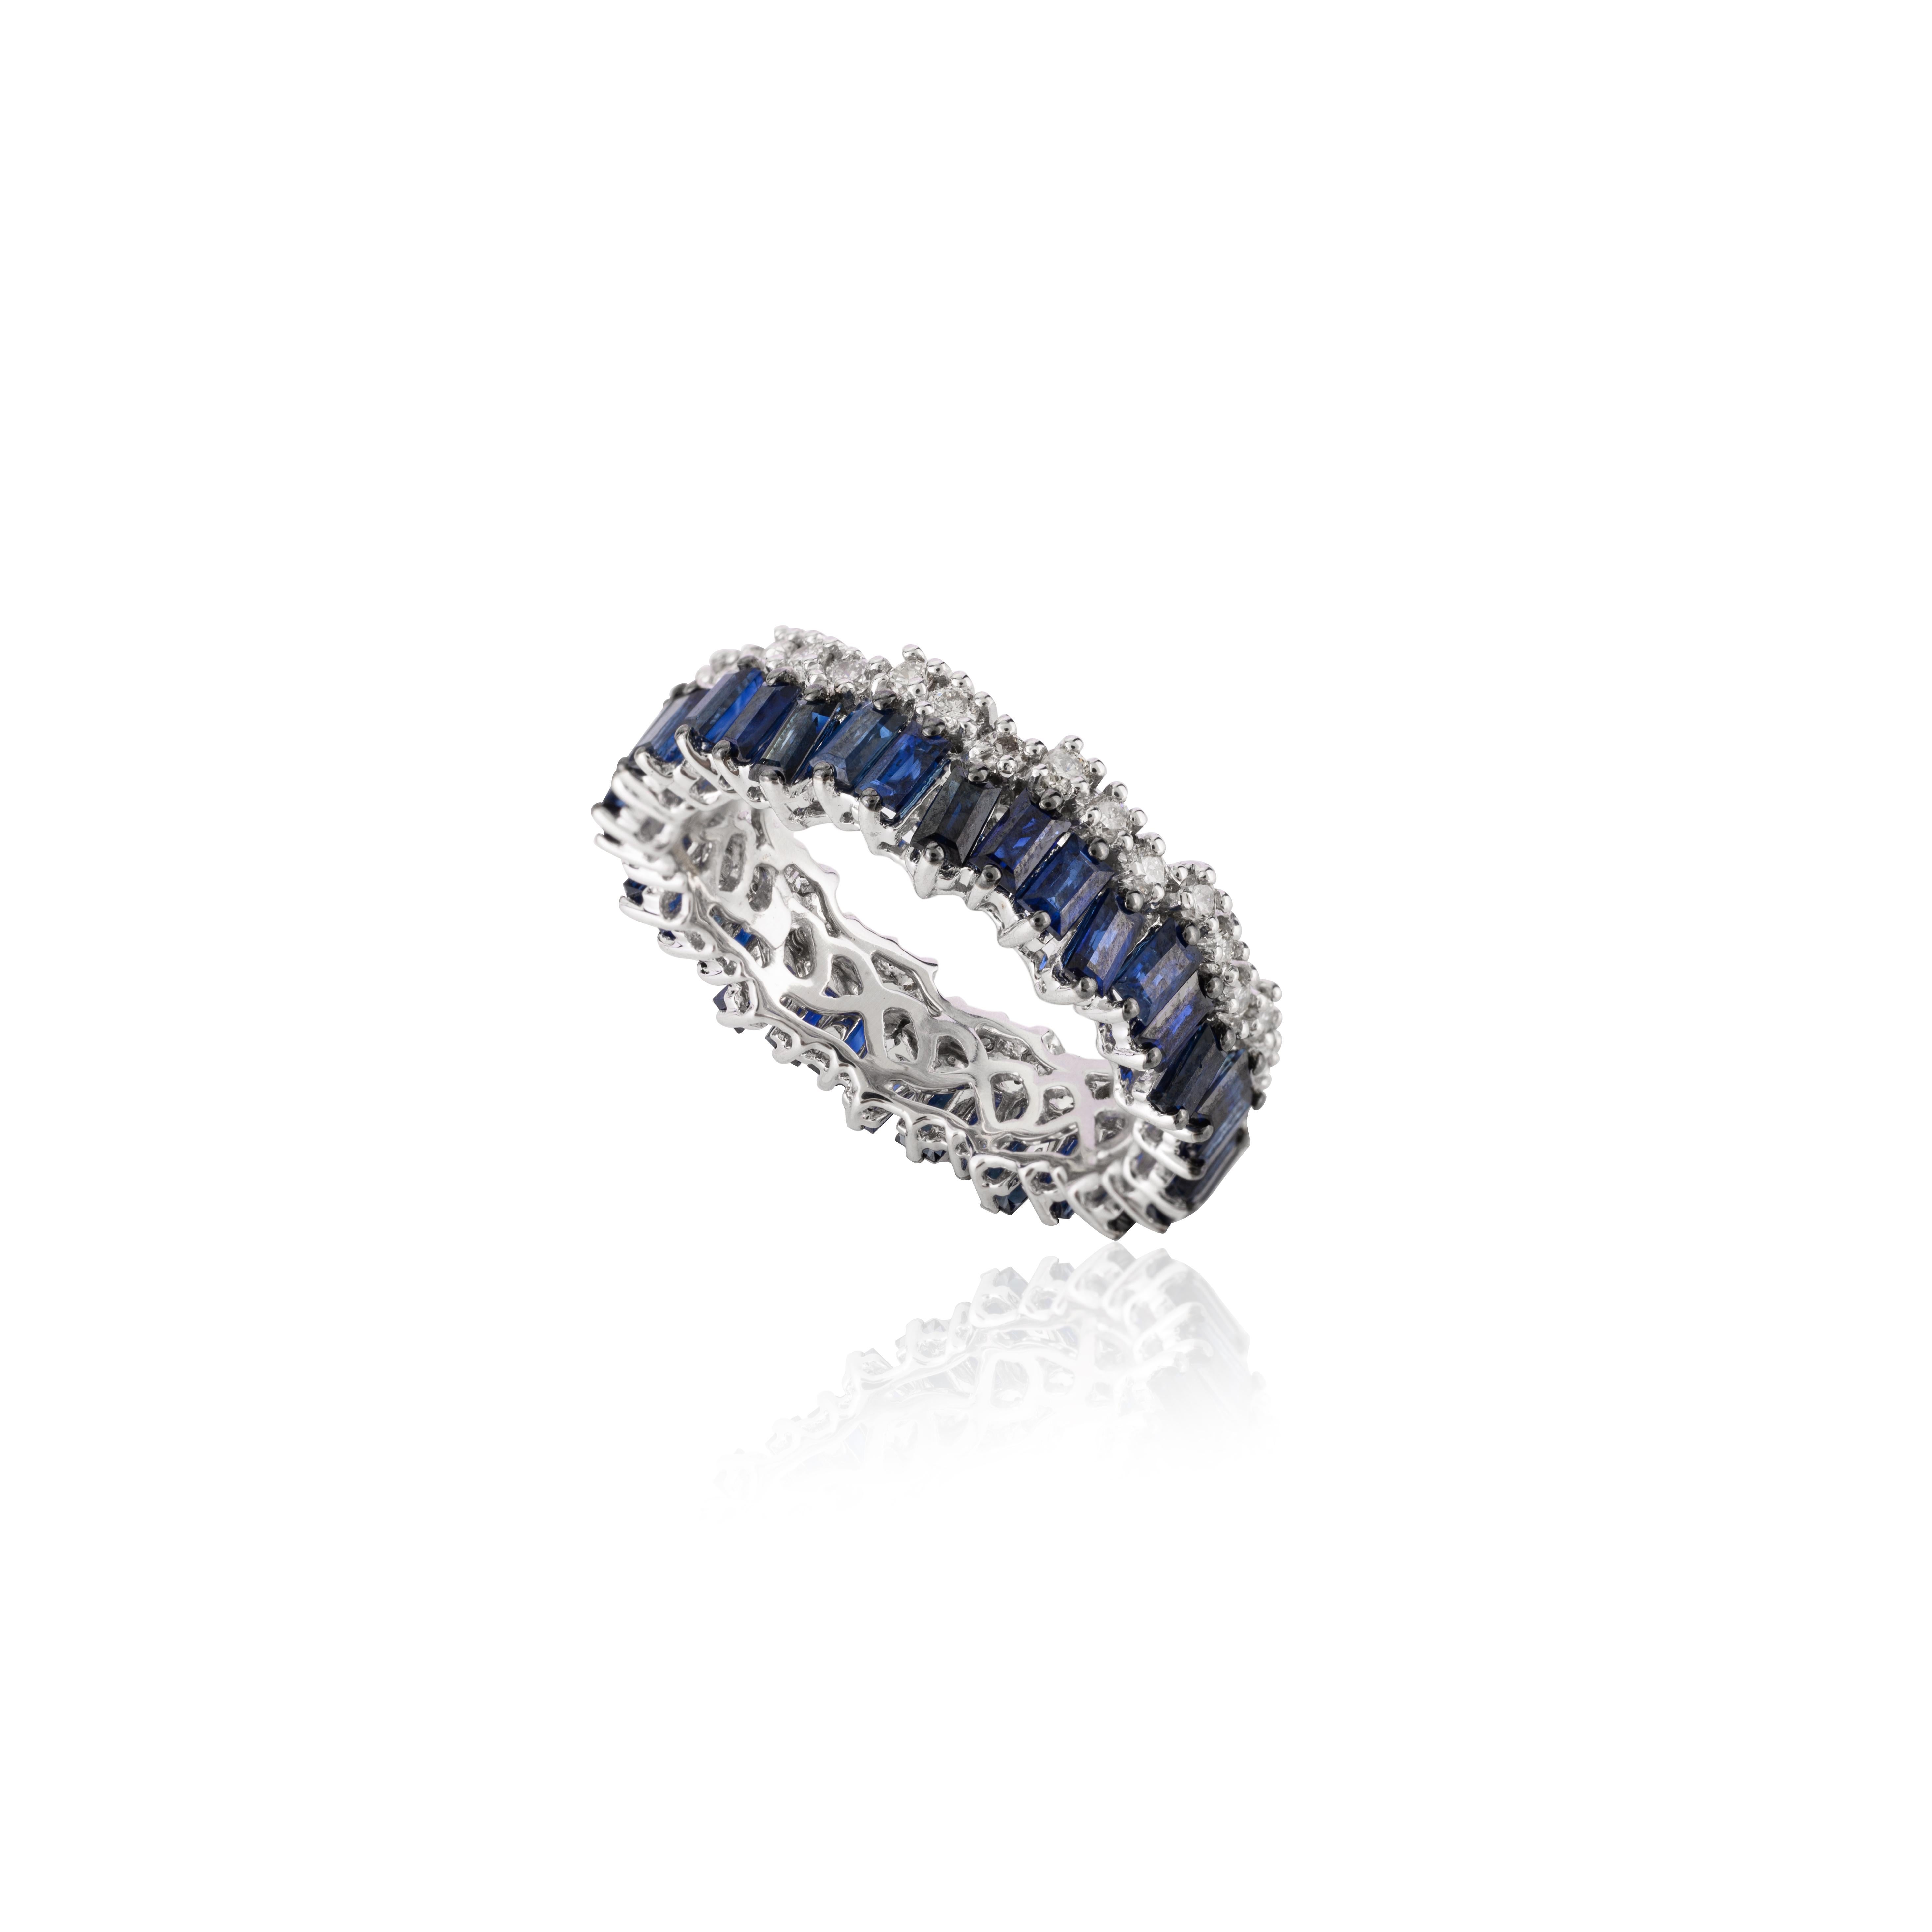 For Sale:  2.83 Ct Blue Sapphire and Diamond Engagement Band Ring in 18k White Gold 10